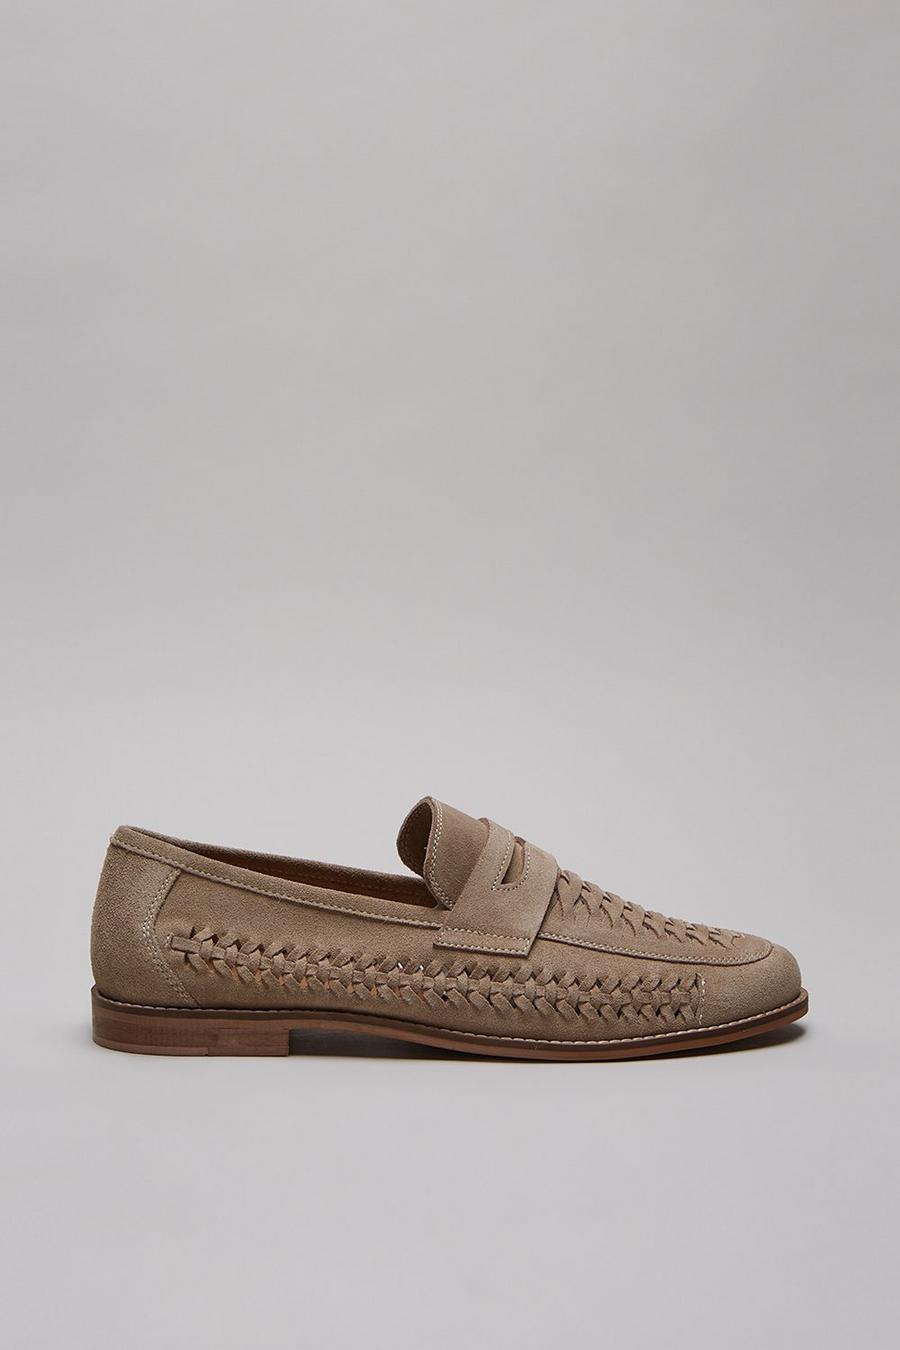 Stone Suede Woven Loafer